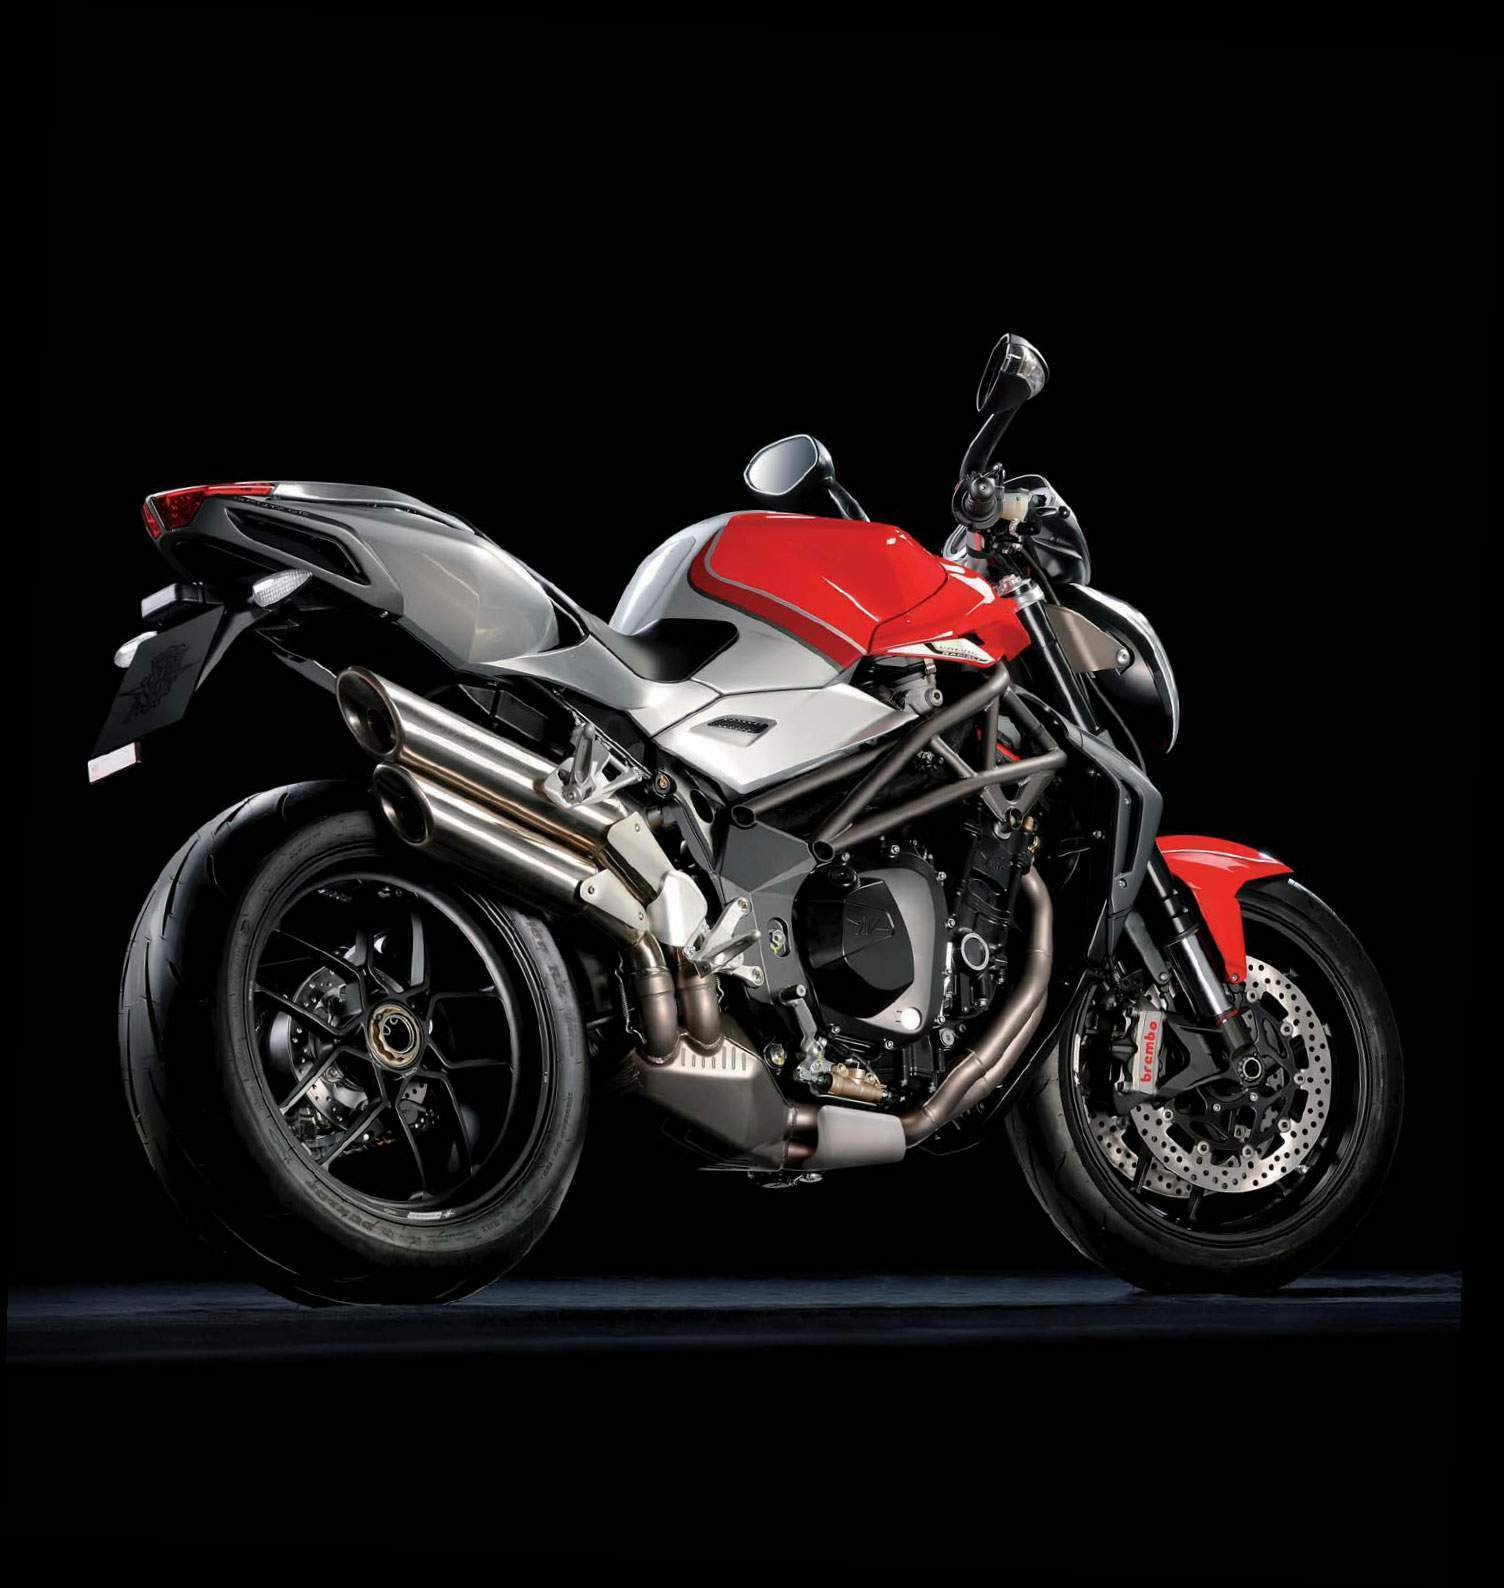 MV Agusta Brutale 1090RR technical specifications